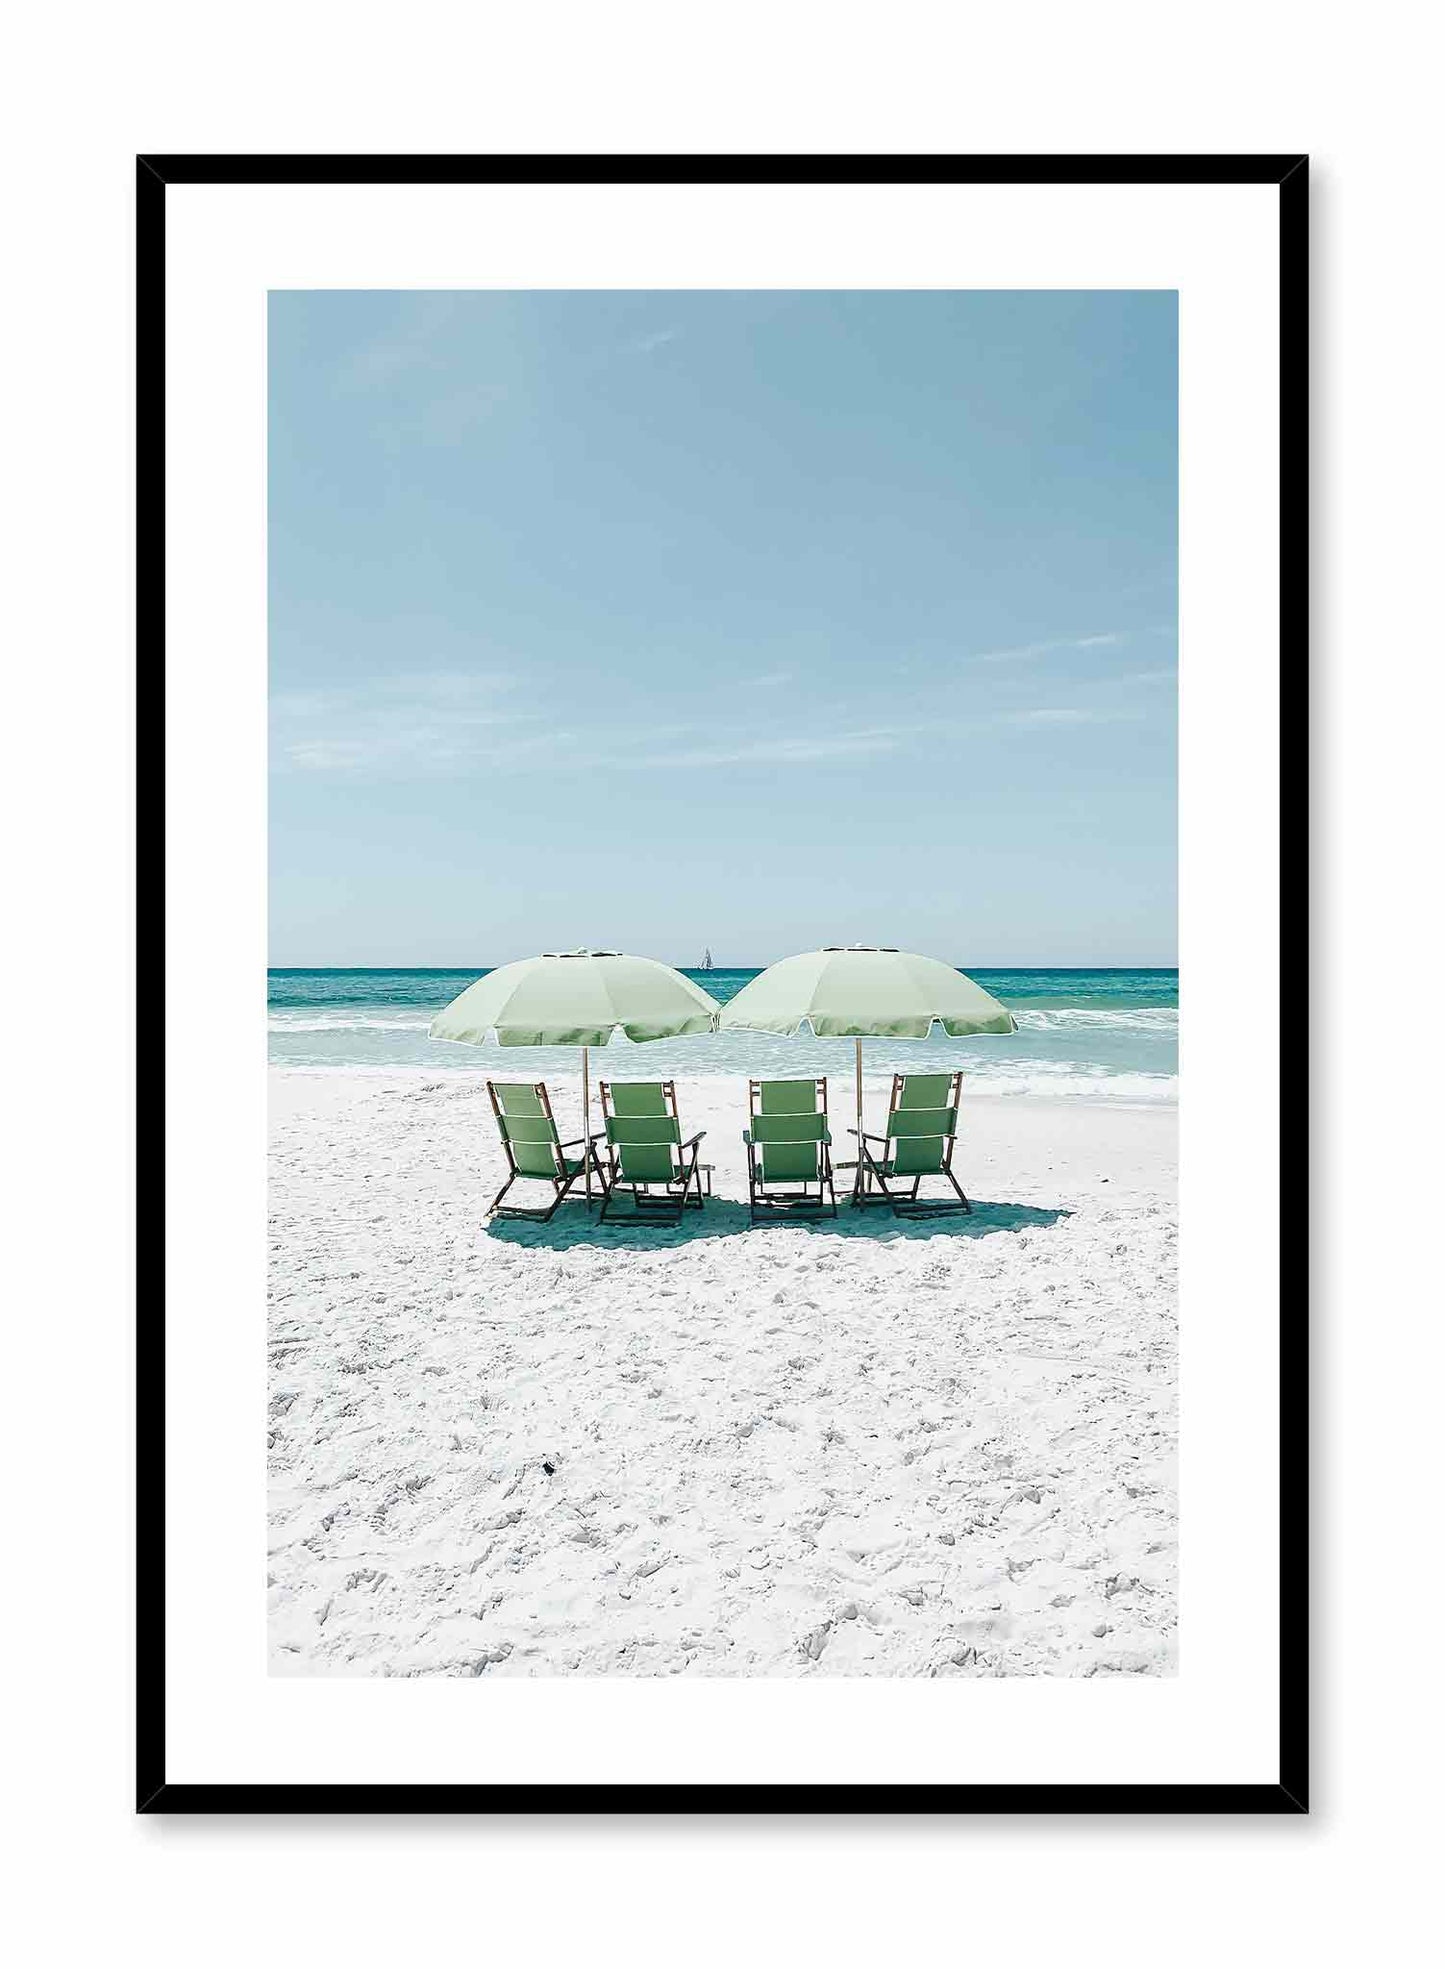 Just Chilling is a beach photography poster of beach chairs under parasols on a white sandy beach by Opposite Wall.